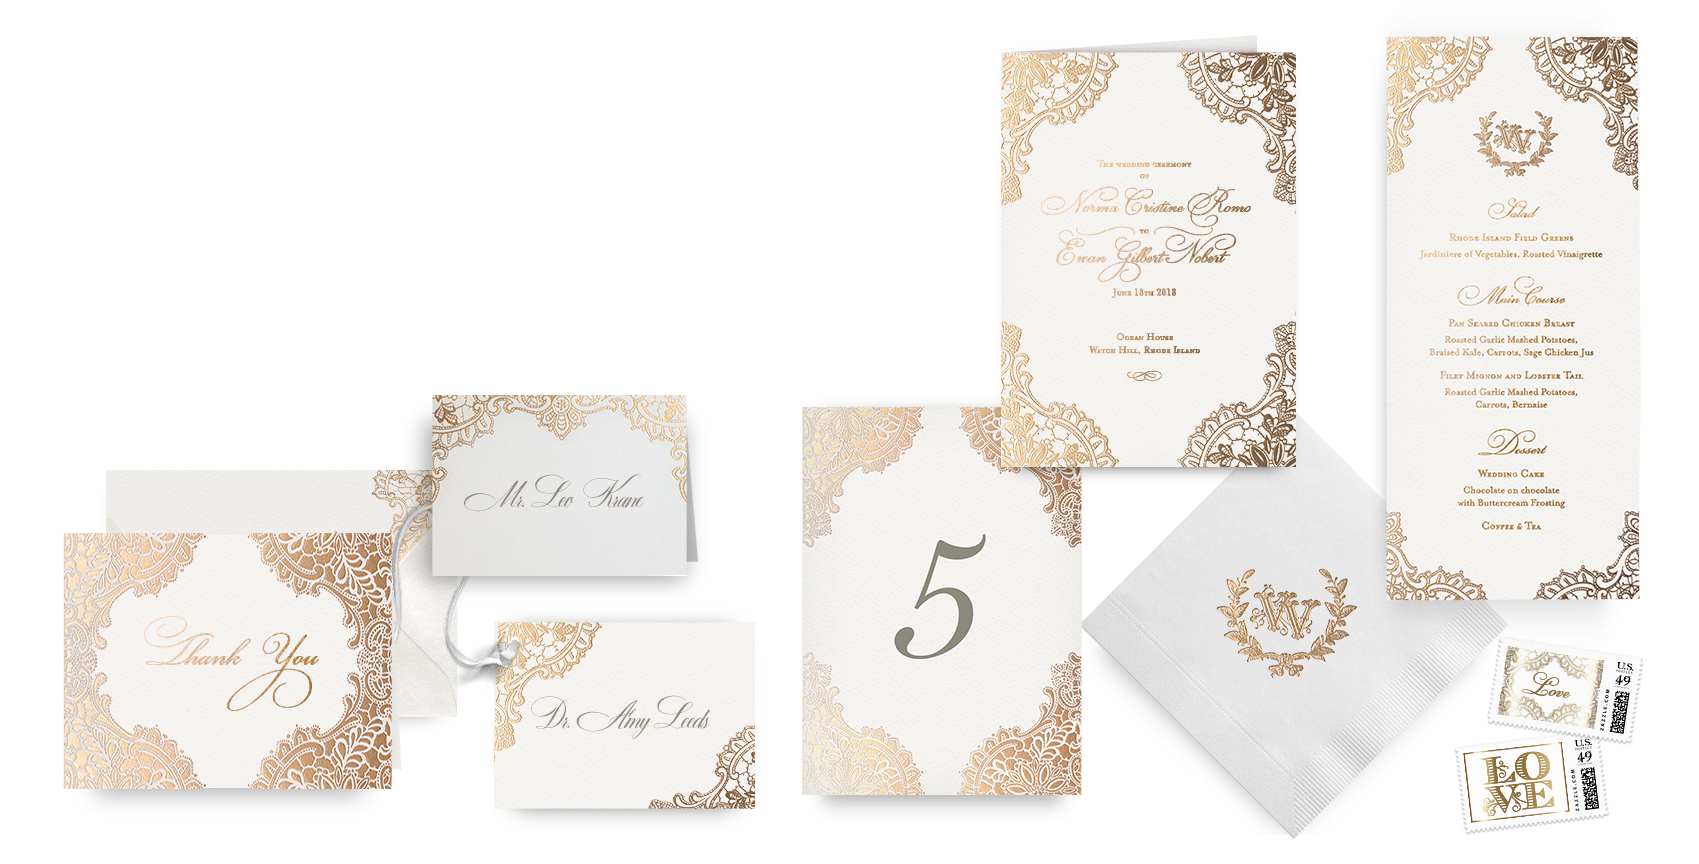 Ornate gold lace menus, programs and wedding accessories